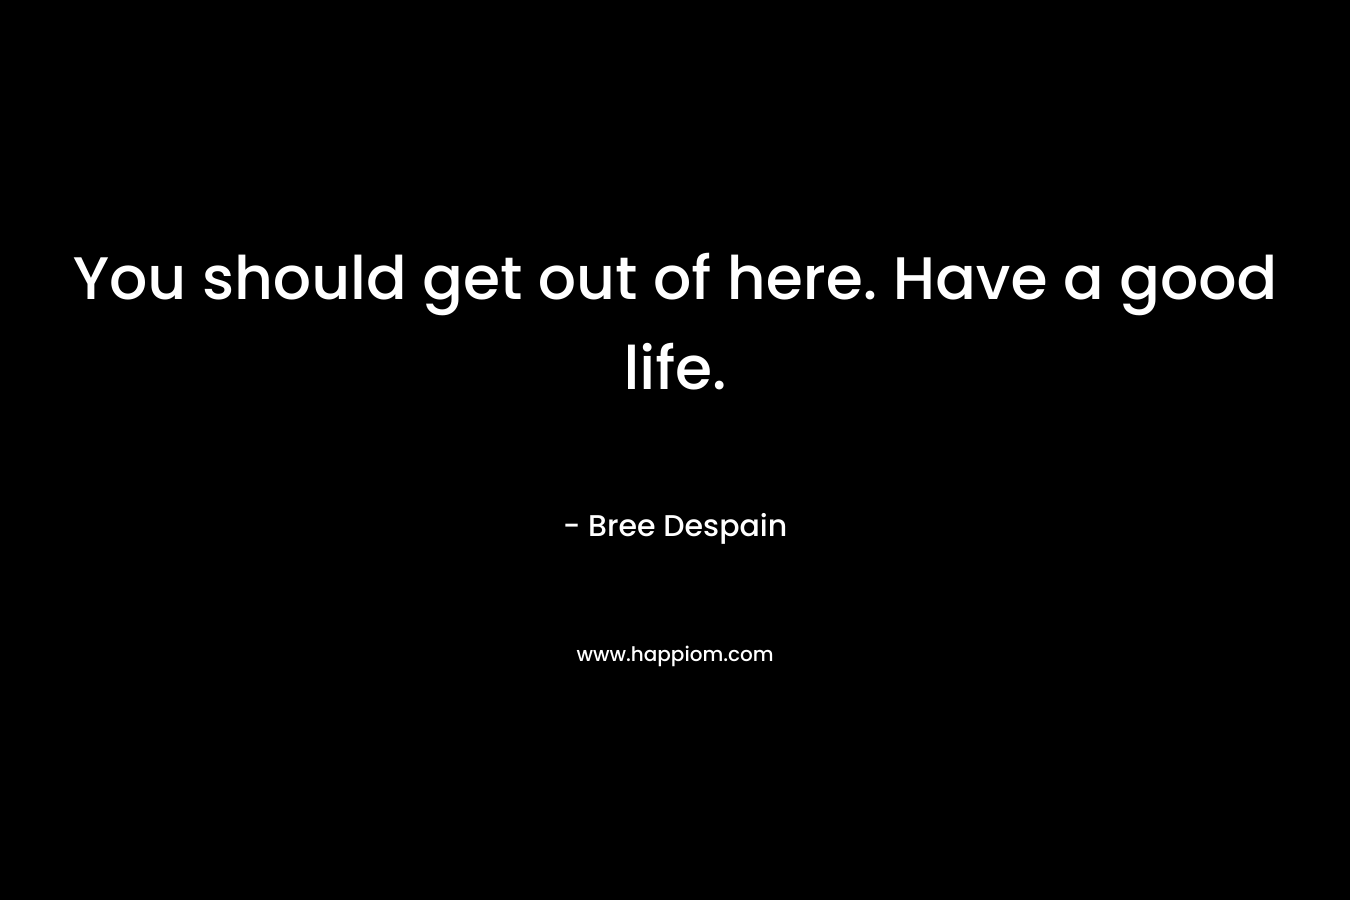 You should get out of here. Have a good life. – Bree Despain